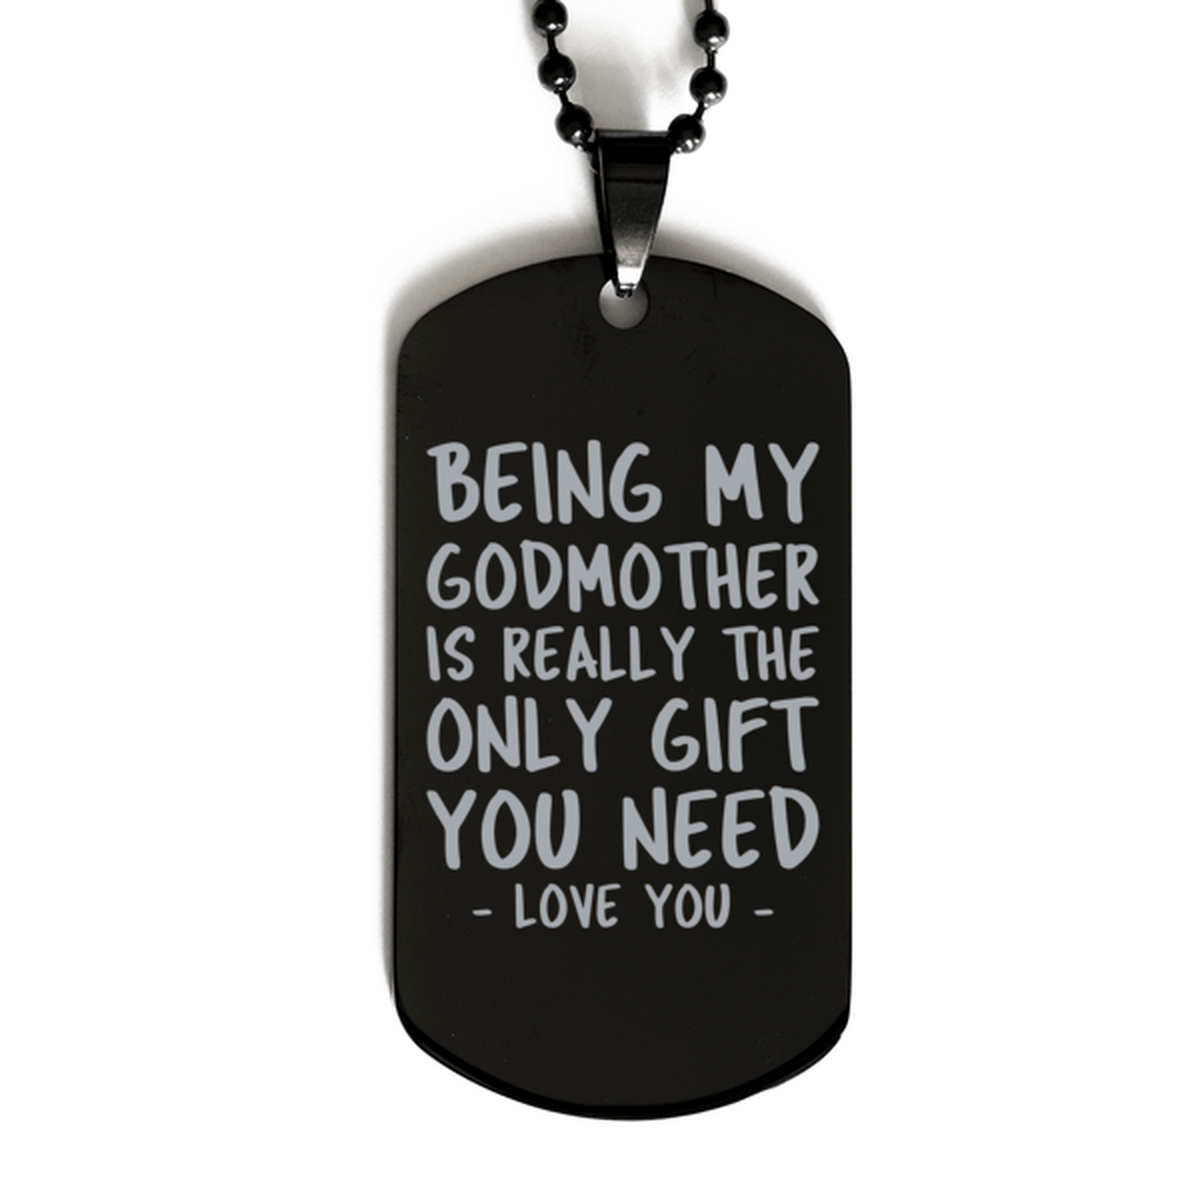 Funny Godmother Black Dog Tag Necklace, Being My Godmother Is Really the Only Gift You Need, Best Birthday Gifts for Godmother